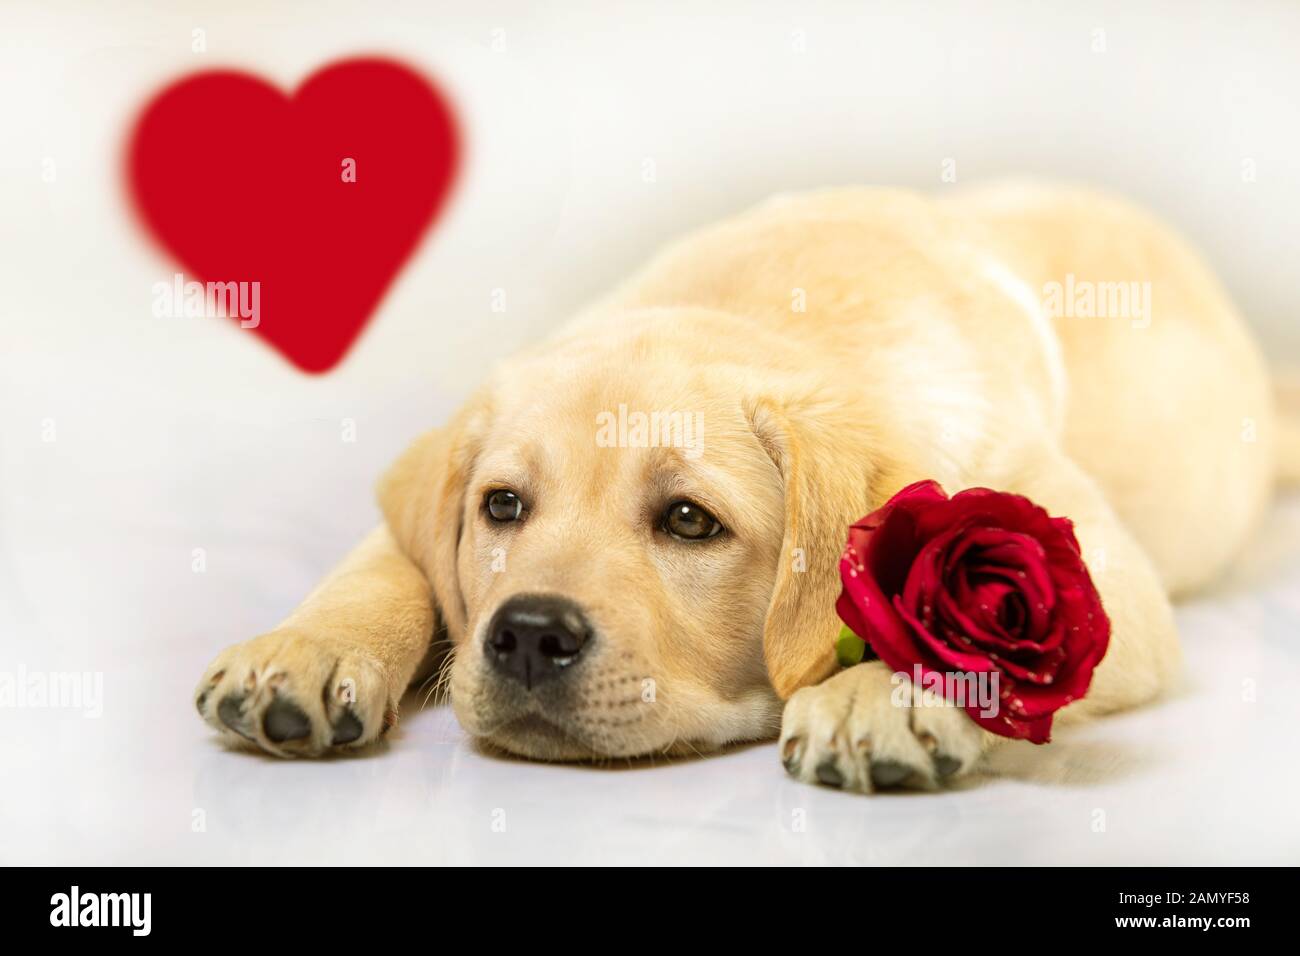 Isolated dog with heart. Golden puppy with red rose, looking up on ...